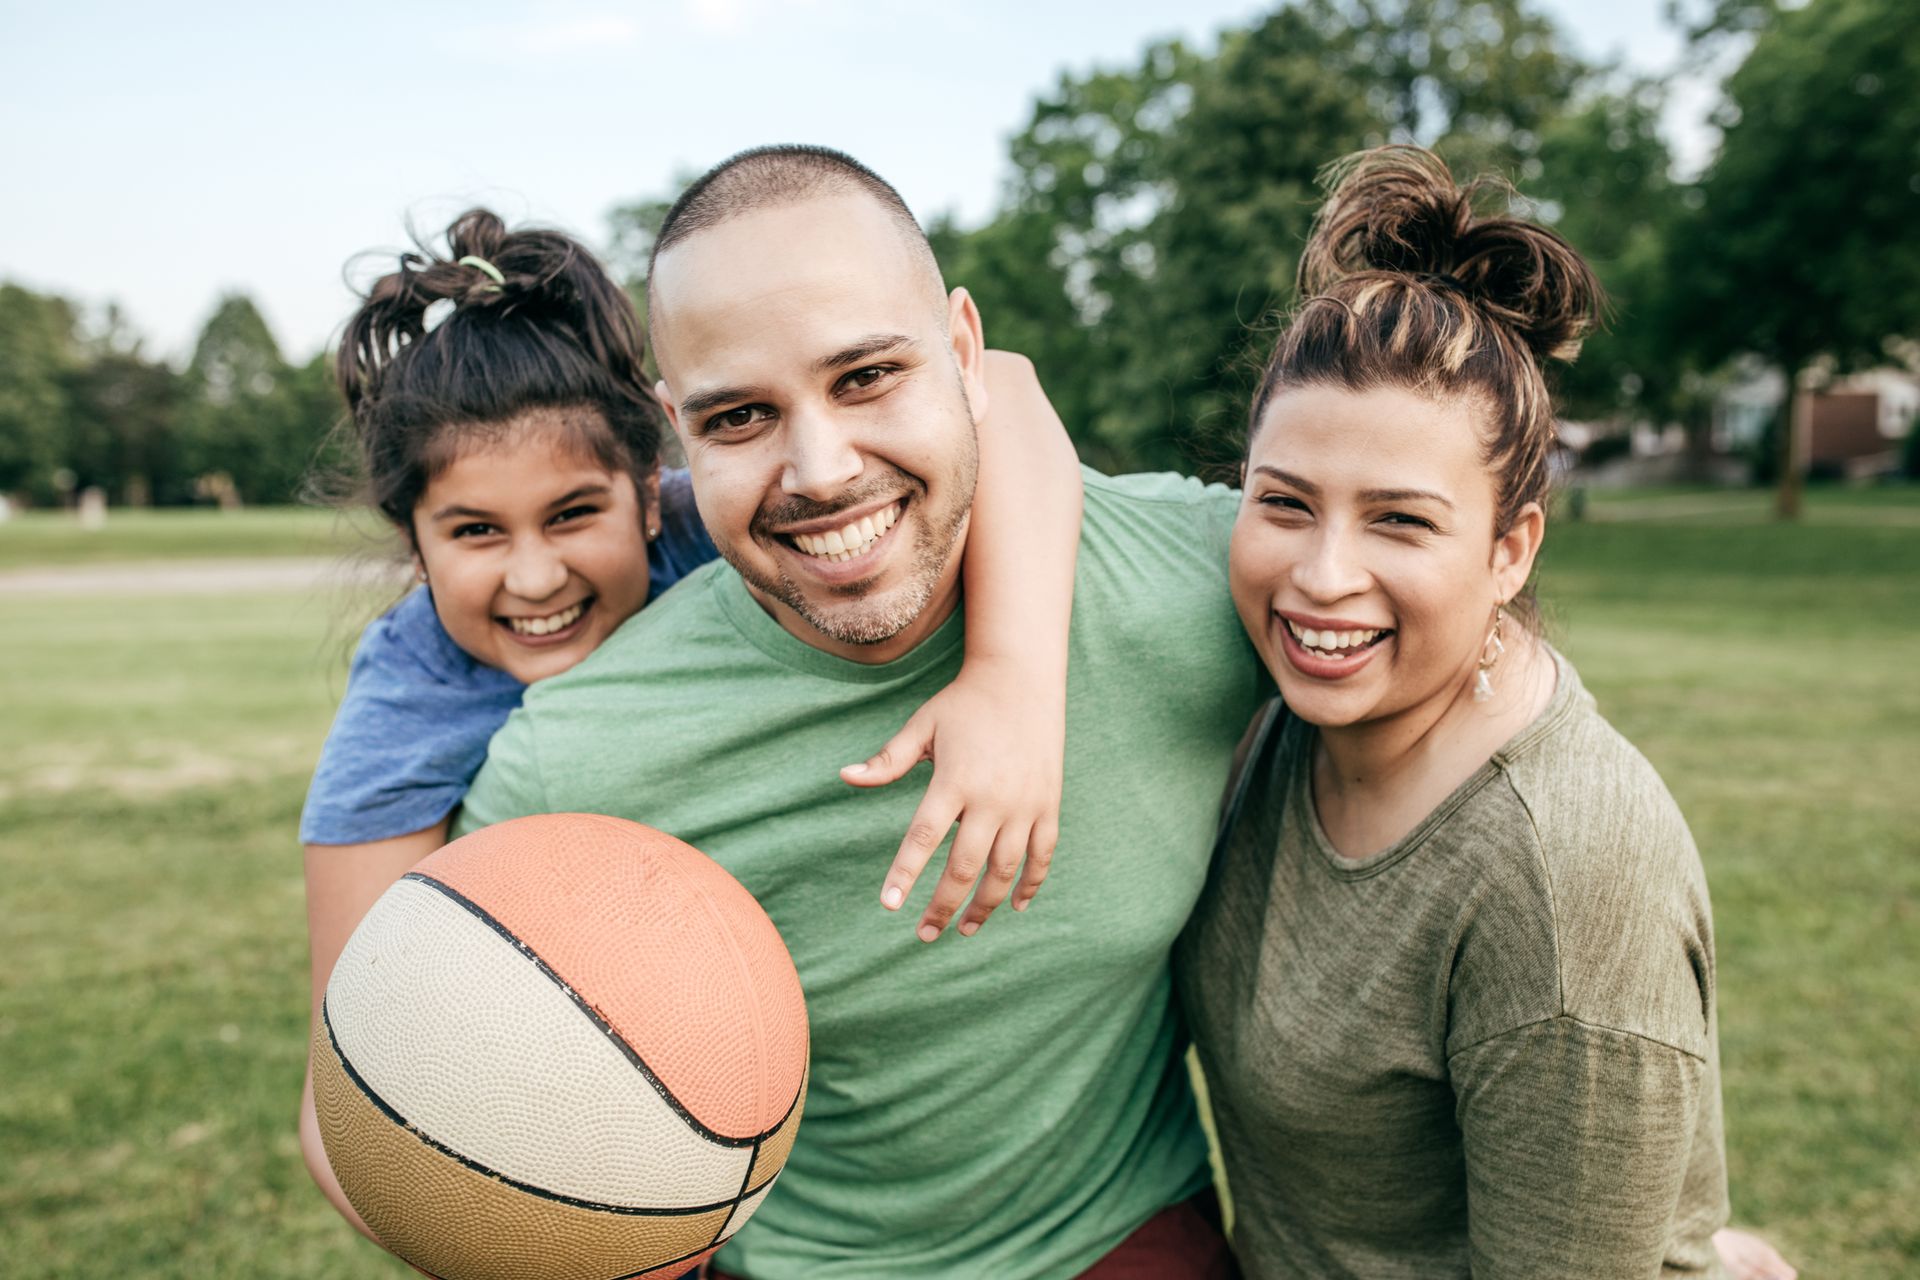 Family of three playing basketball